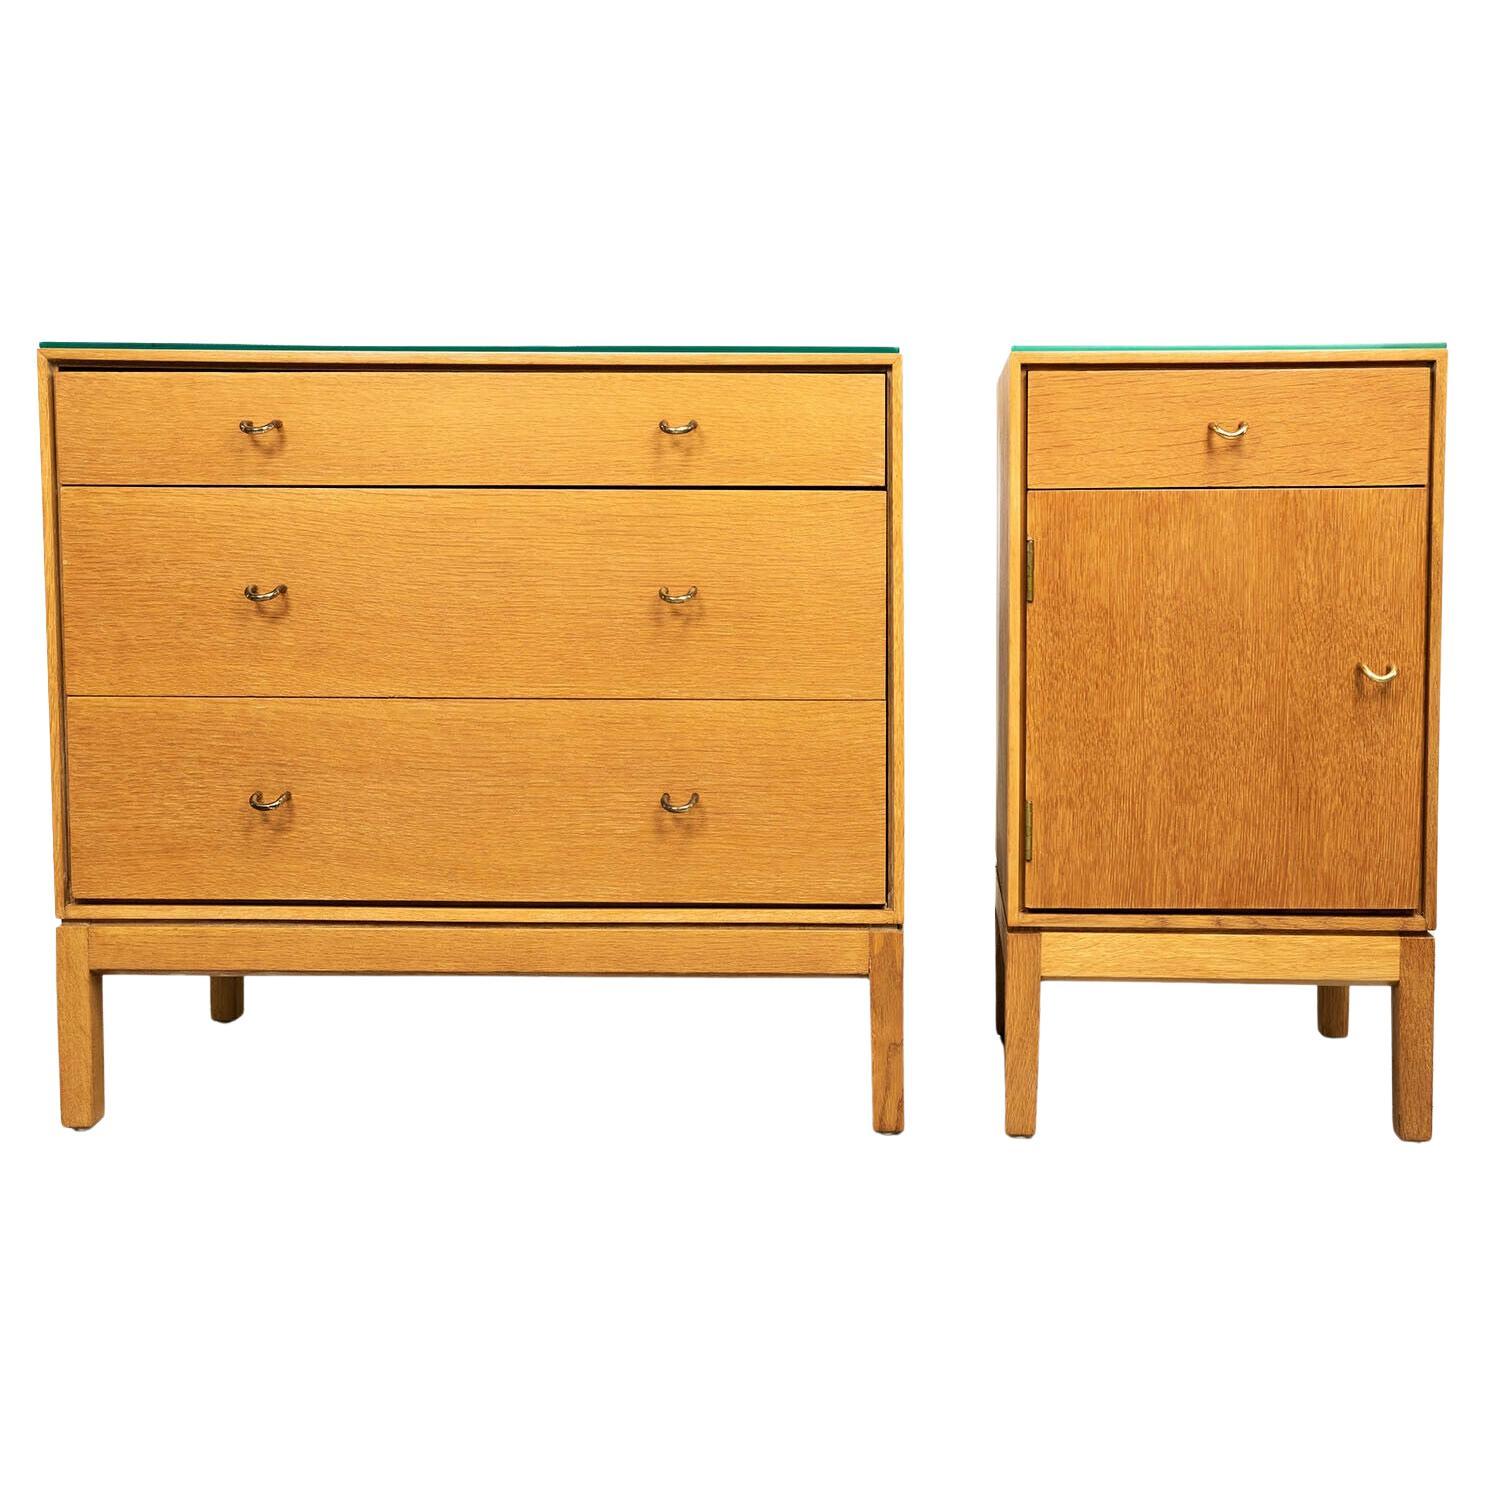 Vintage Mid-Century Bedroom Chest of Drawers and Cabinet Set by Stag